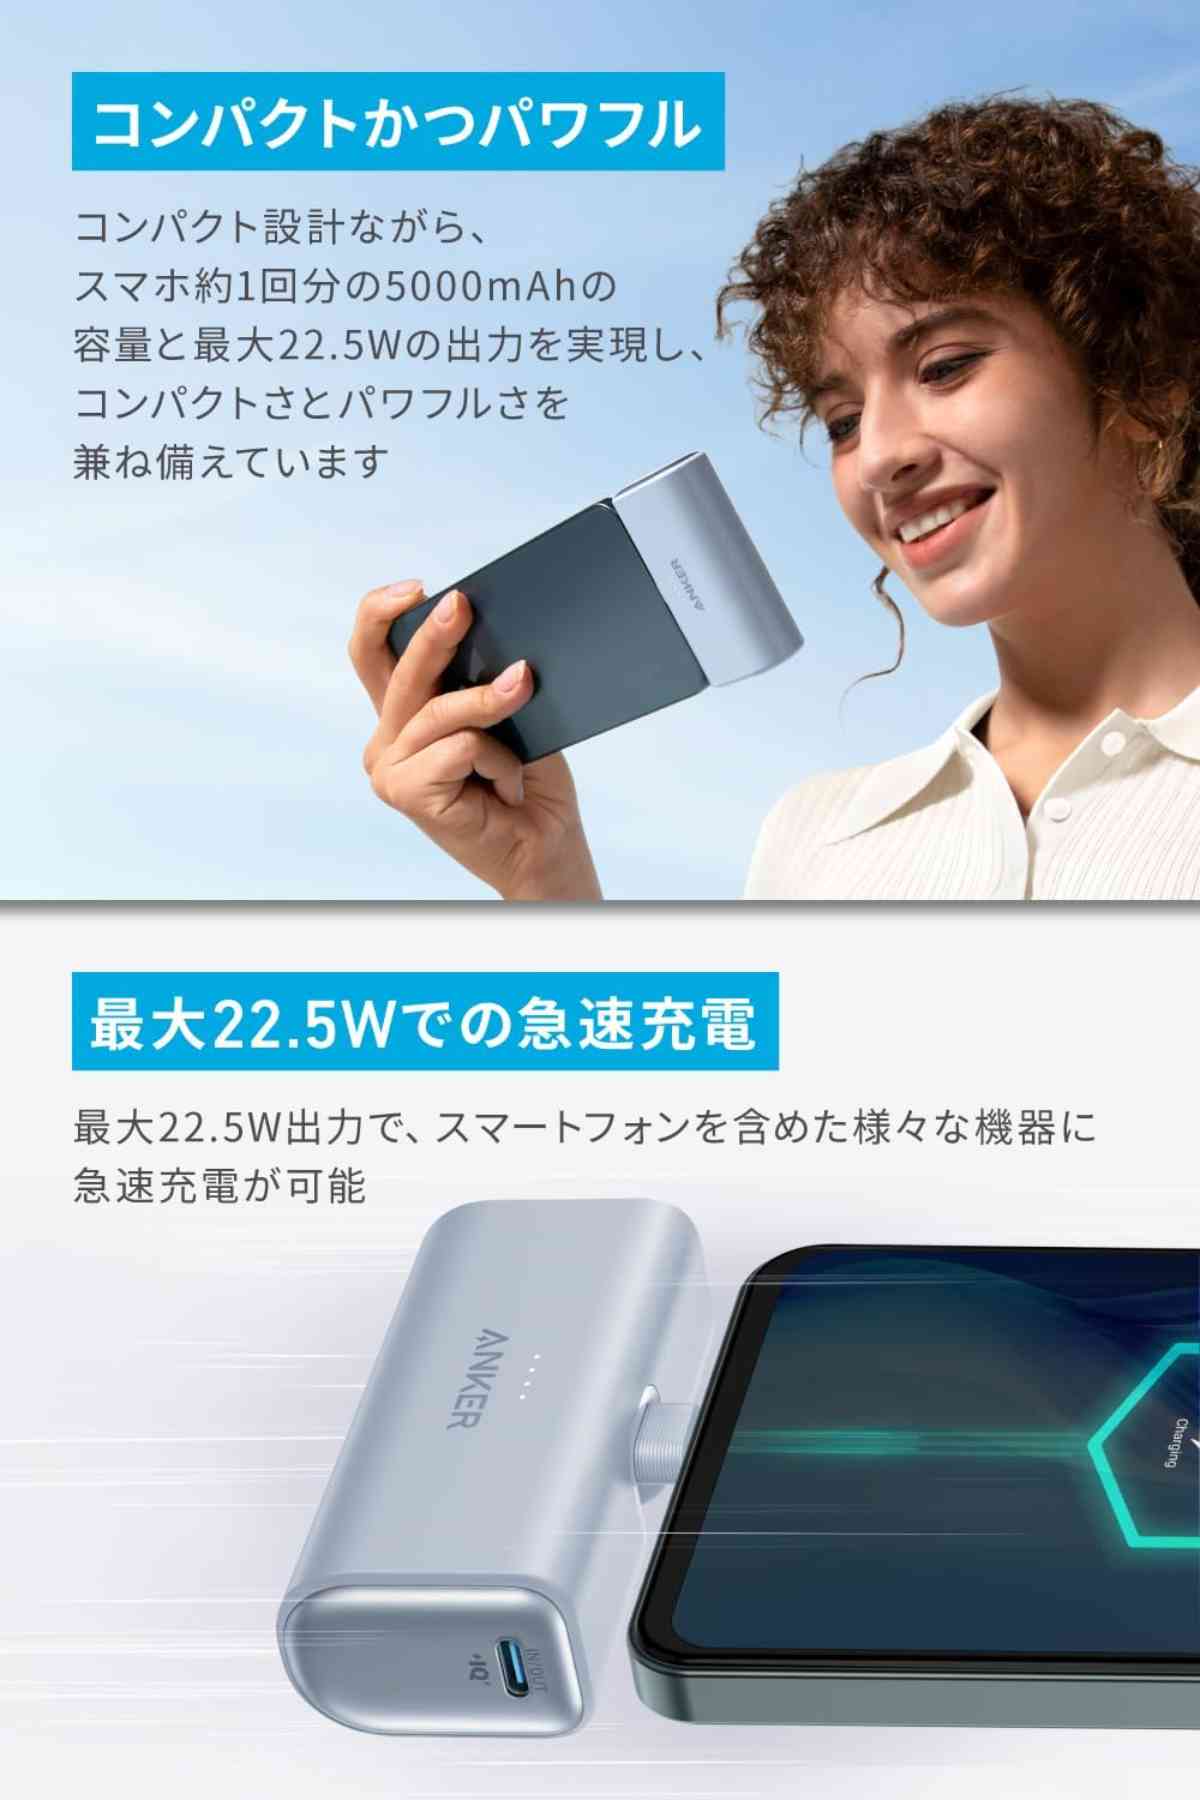 Ankerの「Anker Nano Power Bank (22.5W, Built-In USB-C Connector)」